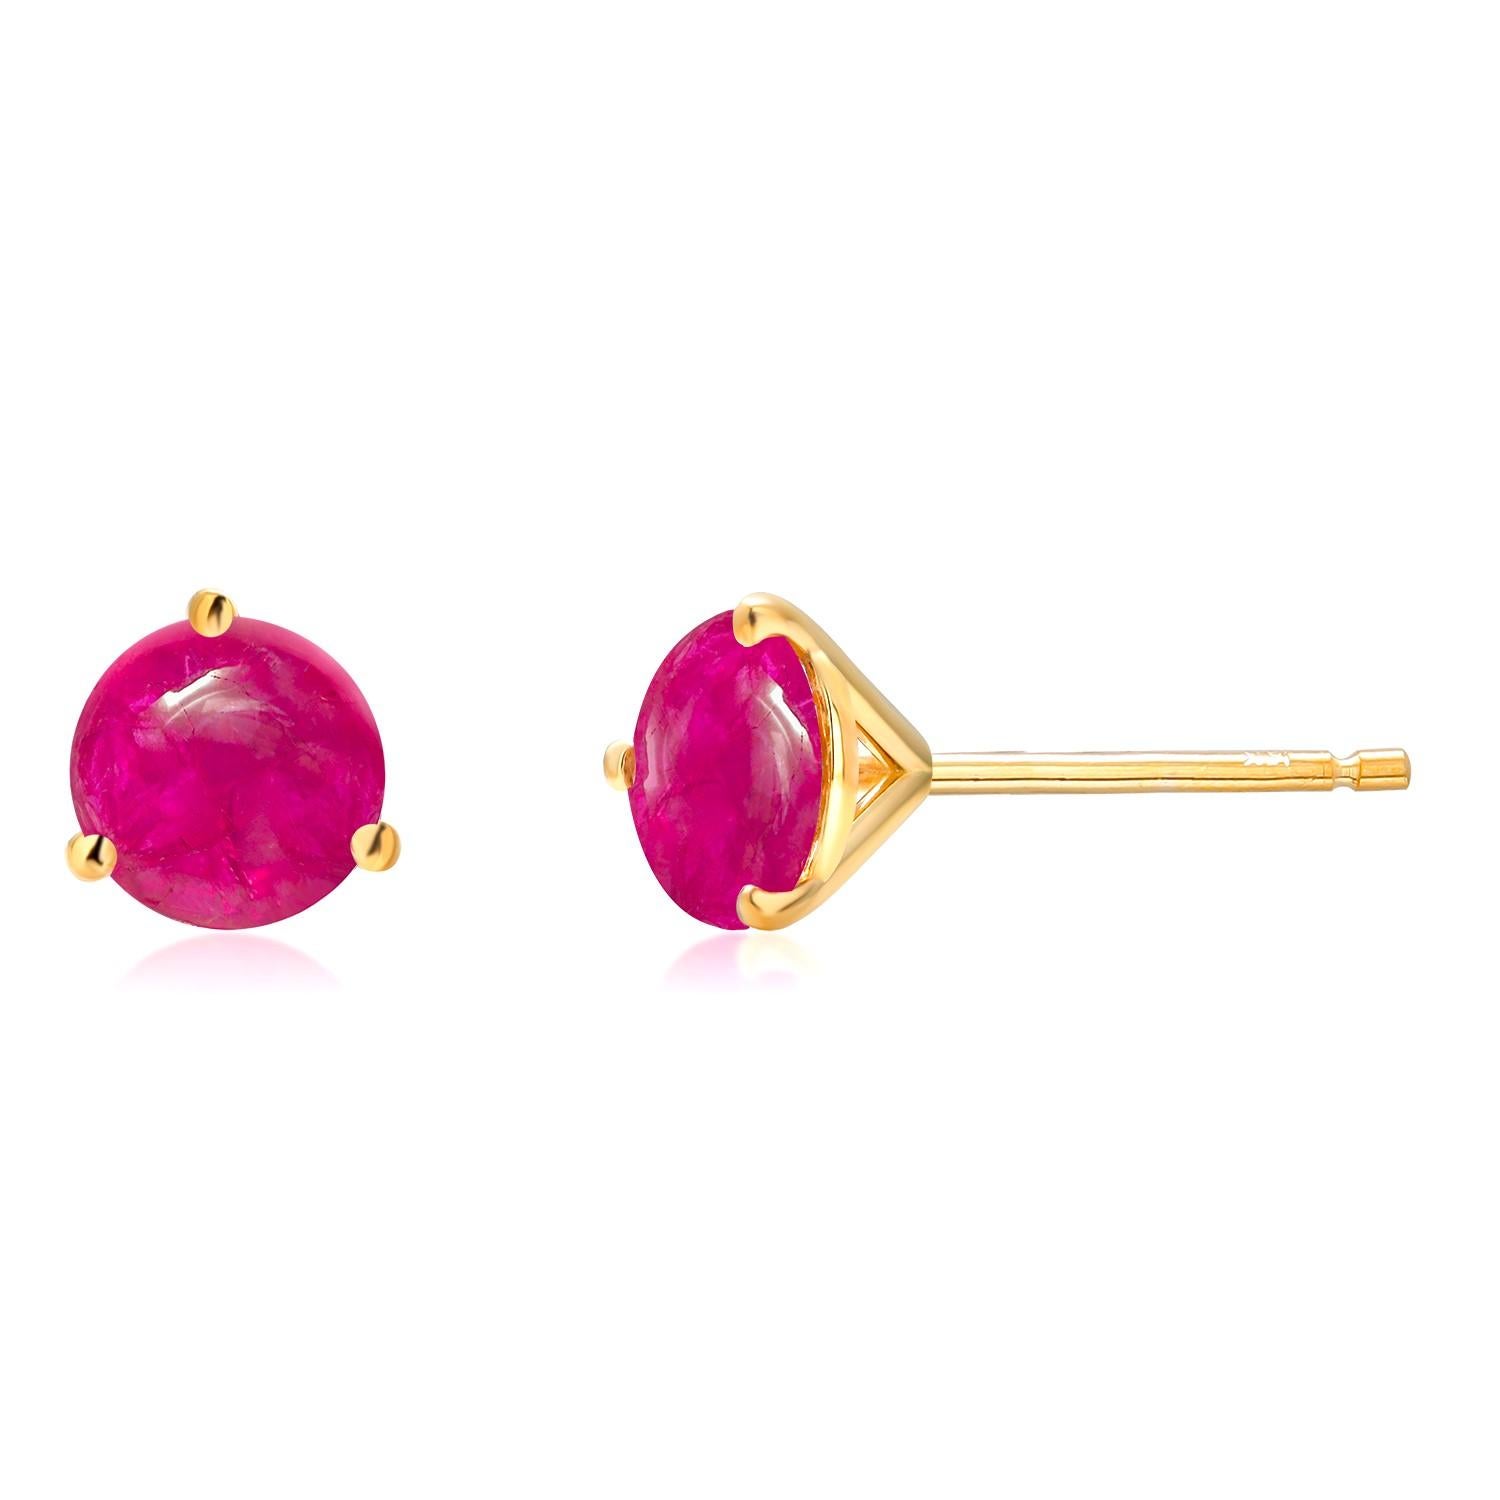 Two Matched Cabochon Rubies Weighing 1.50 Carat 0.23 Inch Yellow Gold Earrings 1